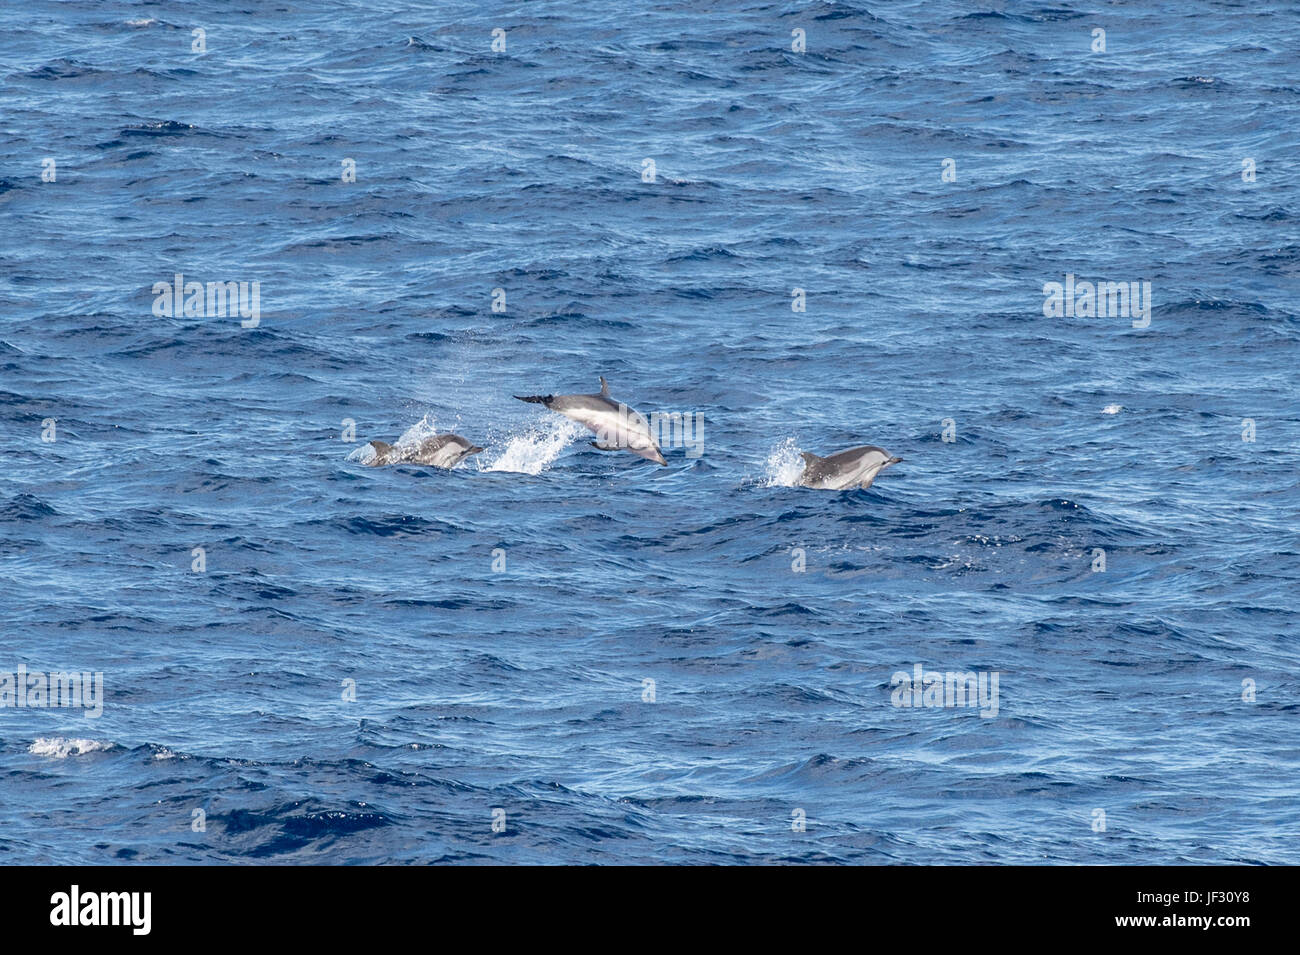 Striped Dolphin, Stenella coeruleoalba group, moving at speed, 85 miles southwest of El Hierro, Canary Islands, North Atlantic Ocean Stock Photo